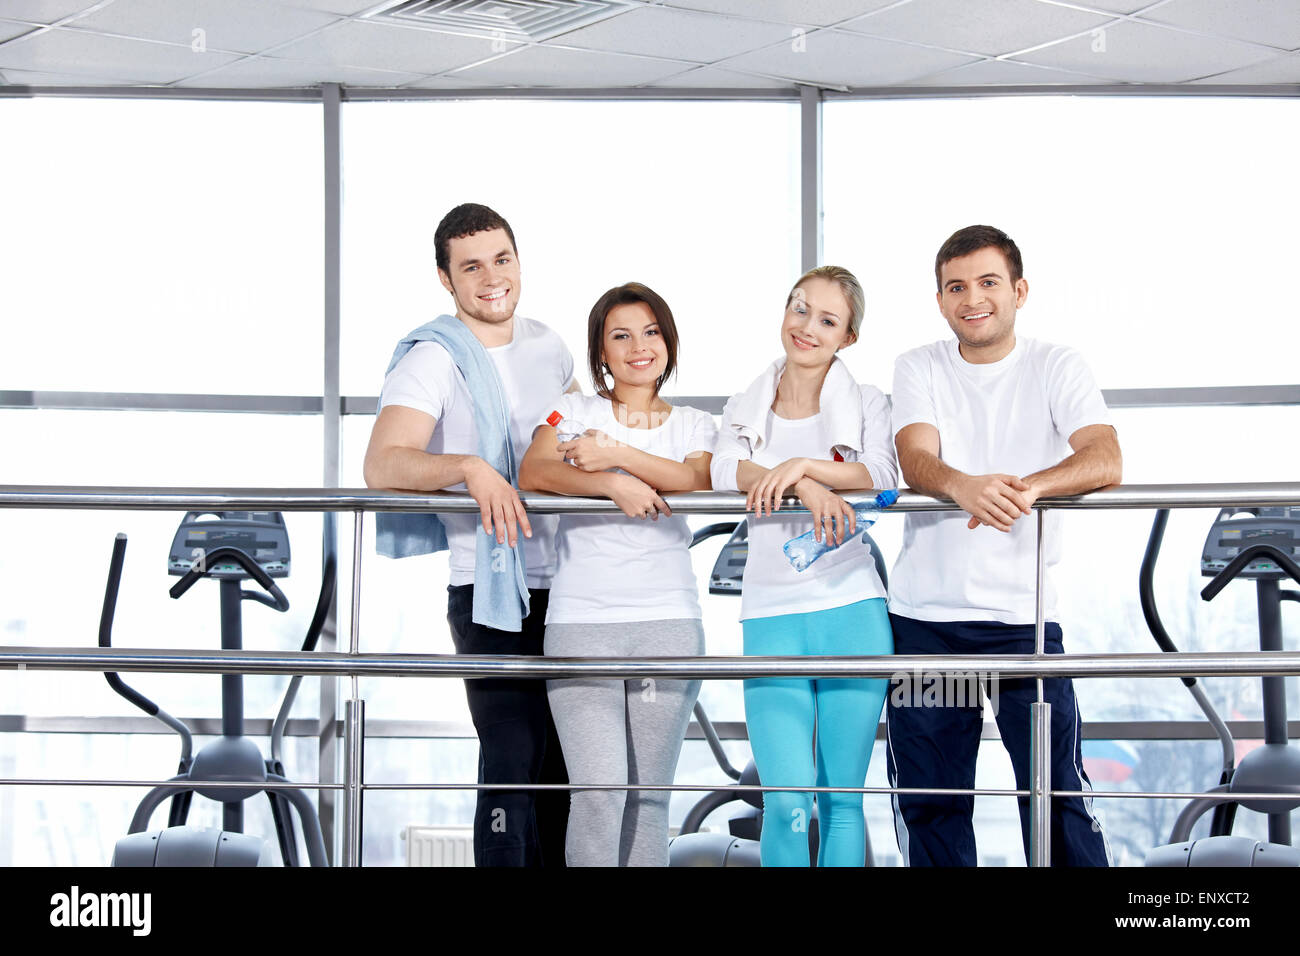 Young people in sports suits in fitness club Stock Photo